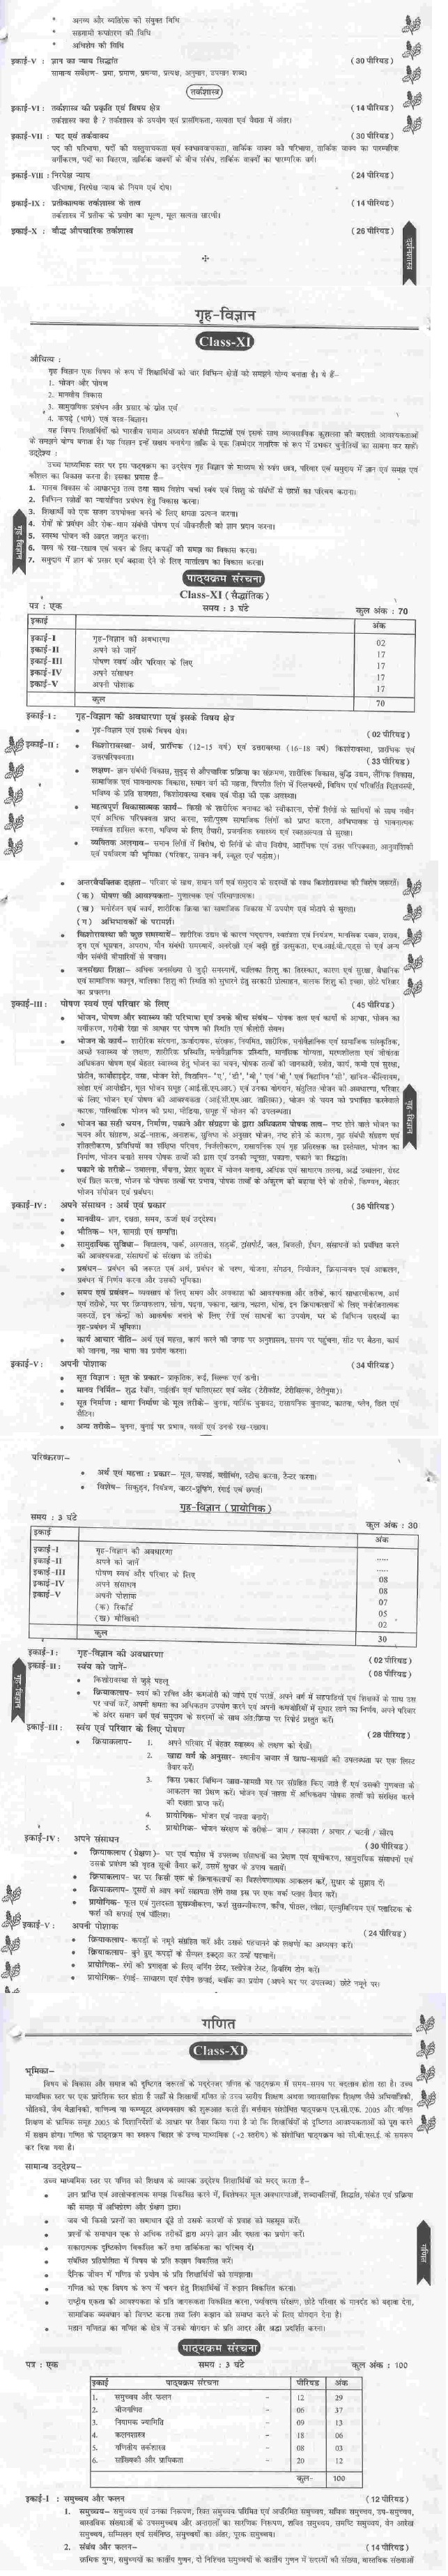 BSEB Syllabus For Class 11 12th ARTS - History, Geography, Political Science, Home Science Bihar Board Syllabus PDF Download